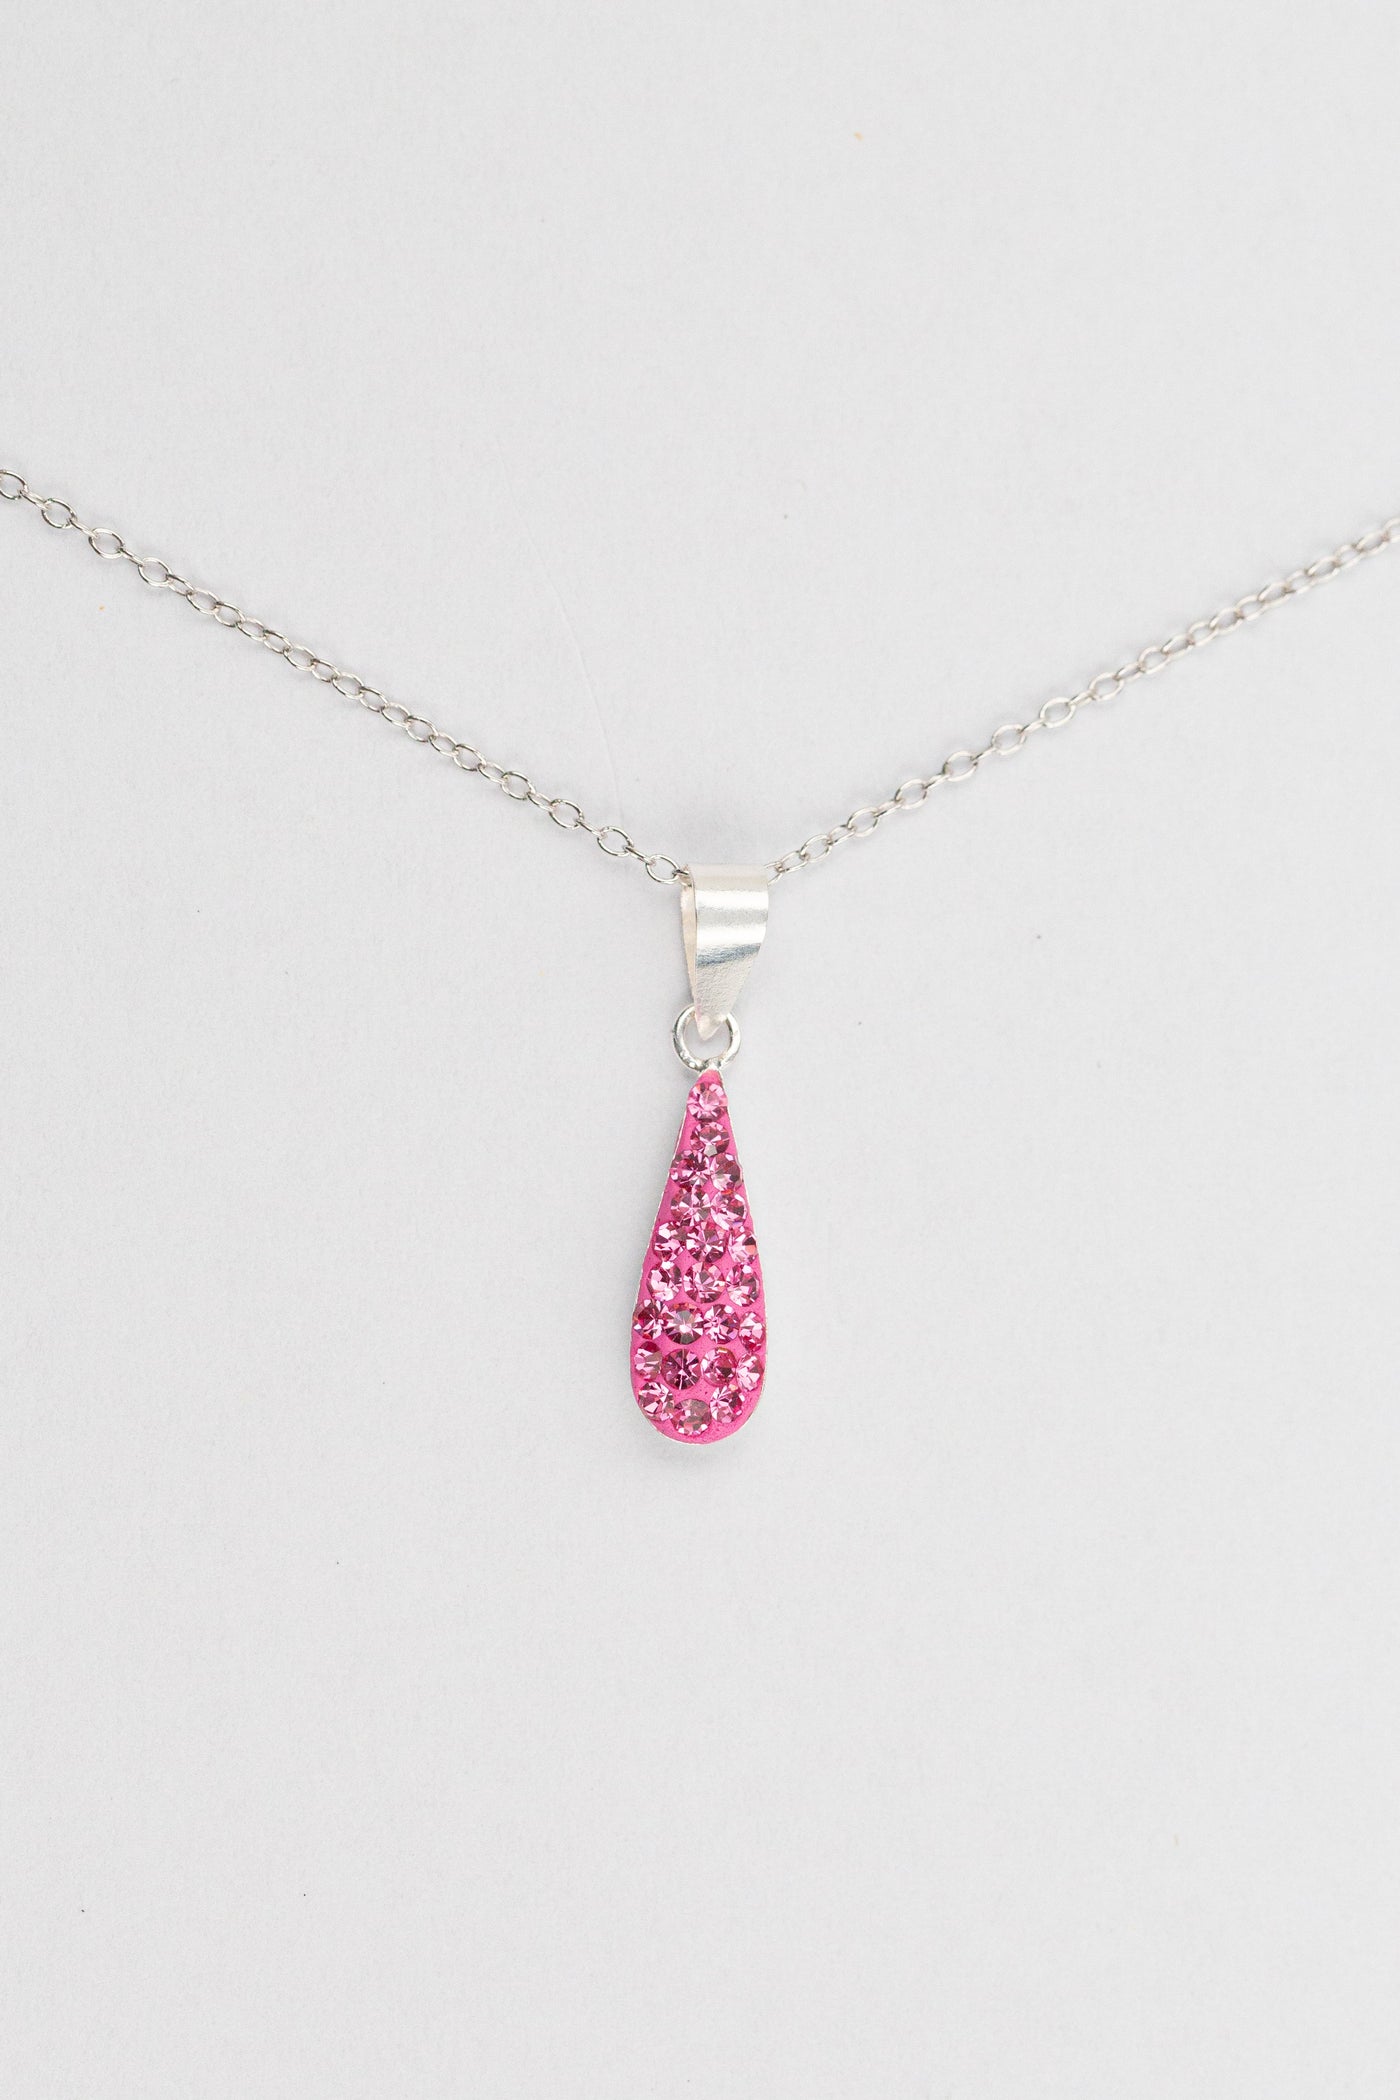 Swarovski Crystal Teardrop Silver Necklace in Rose Pink | Annie and Sisters